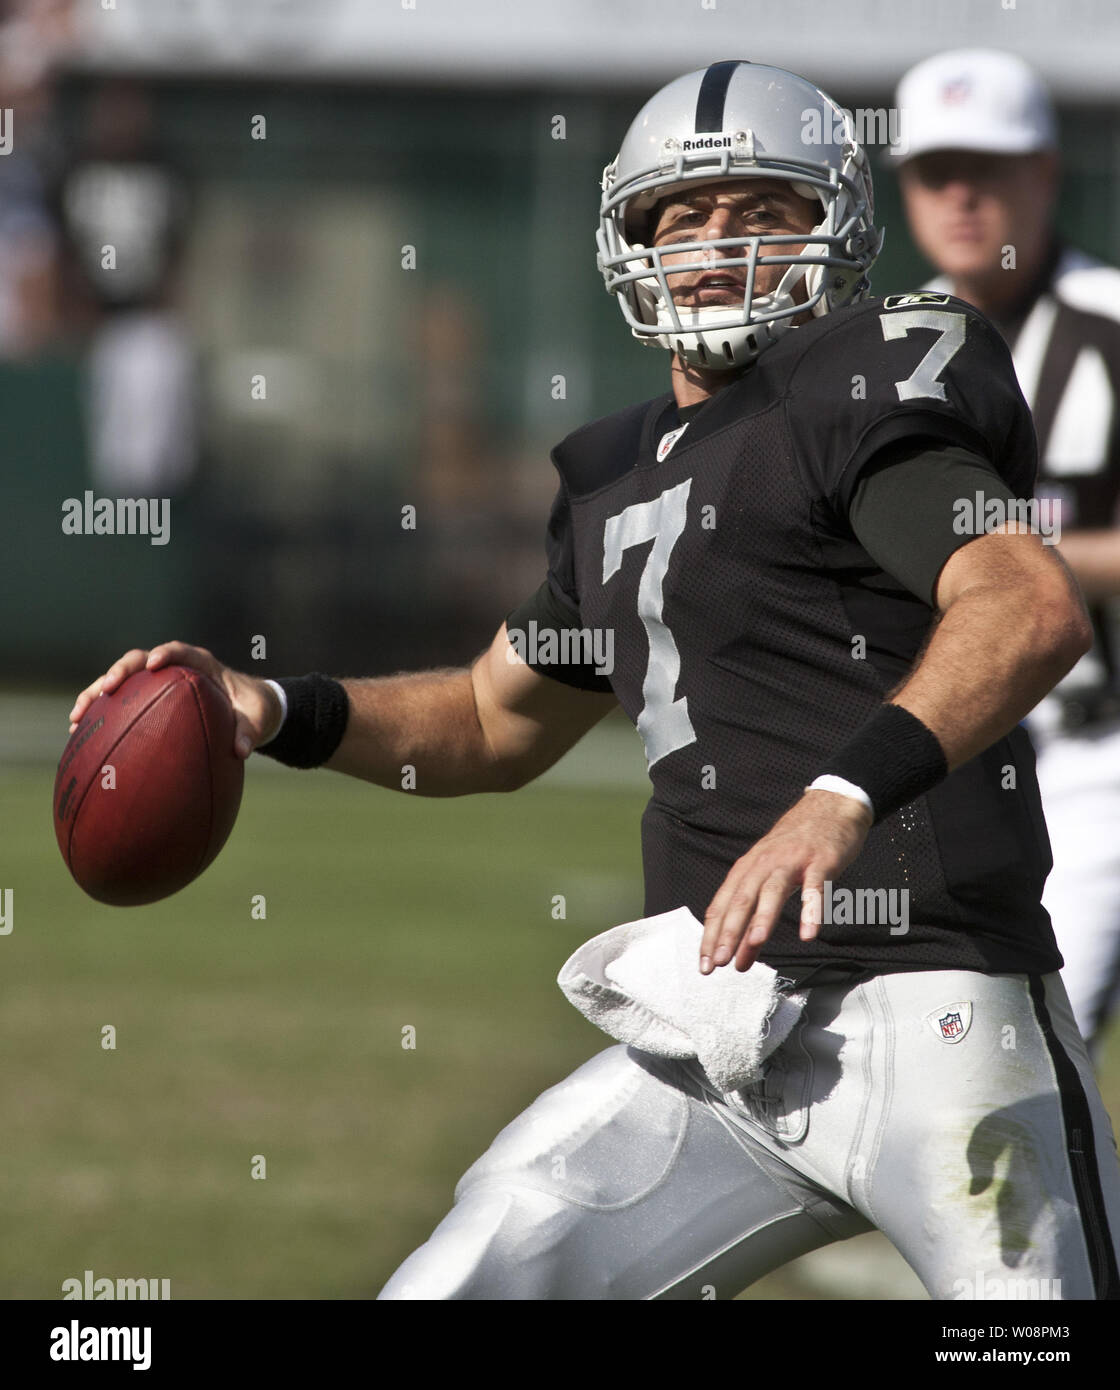 Oakland Raiders QB Kyle Boller, playing for the injured Jason Campbell passes against the Cleveland Browns at the Coliseum in Oakland, California on October 16, 2011. The Raiders defeated the Browns 24-17.     UPI/Terry Schmitt Stock Photo